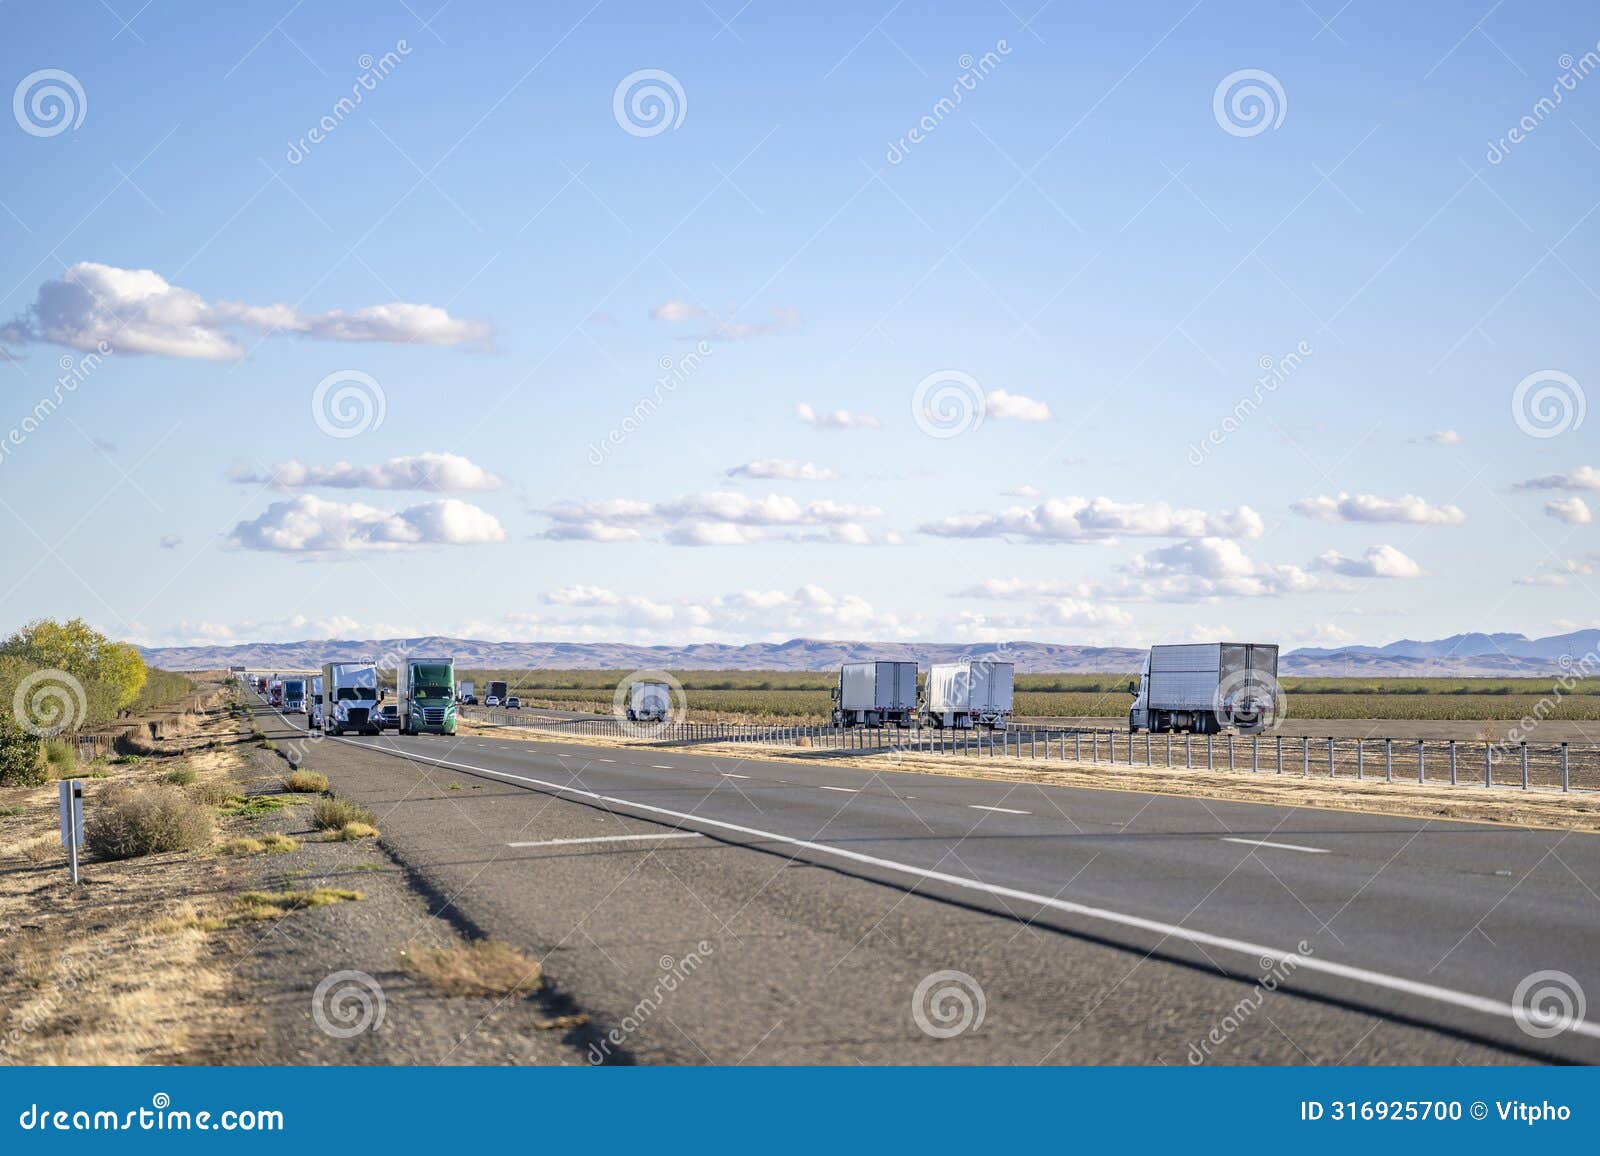 convoy of the big rig semi trucks with semi trailers transporting cargo running in both directions